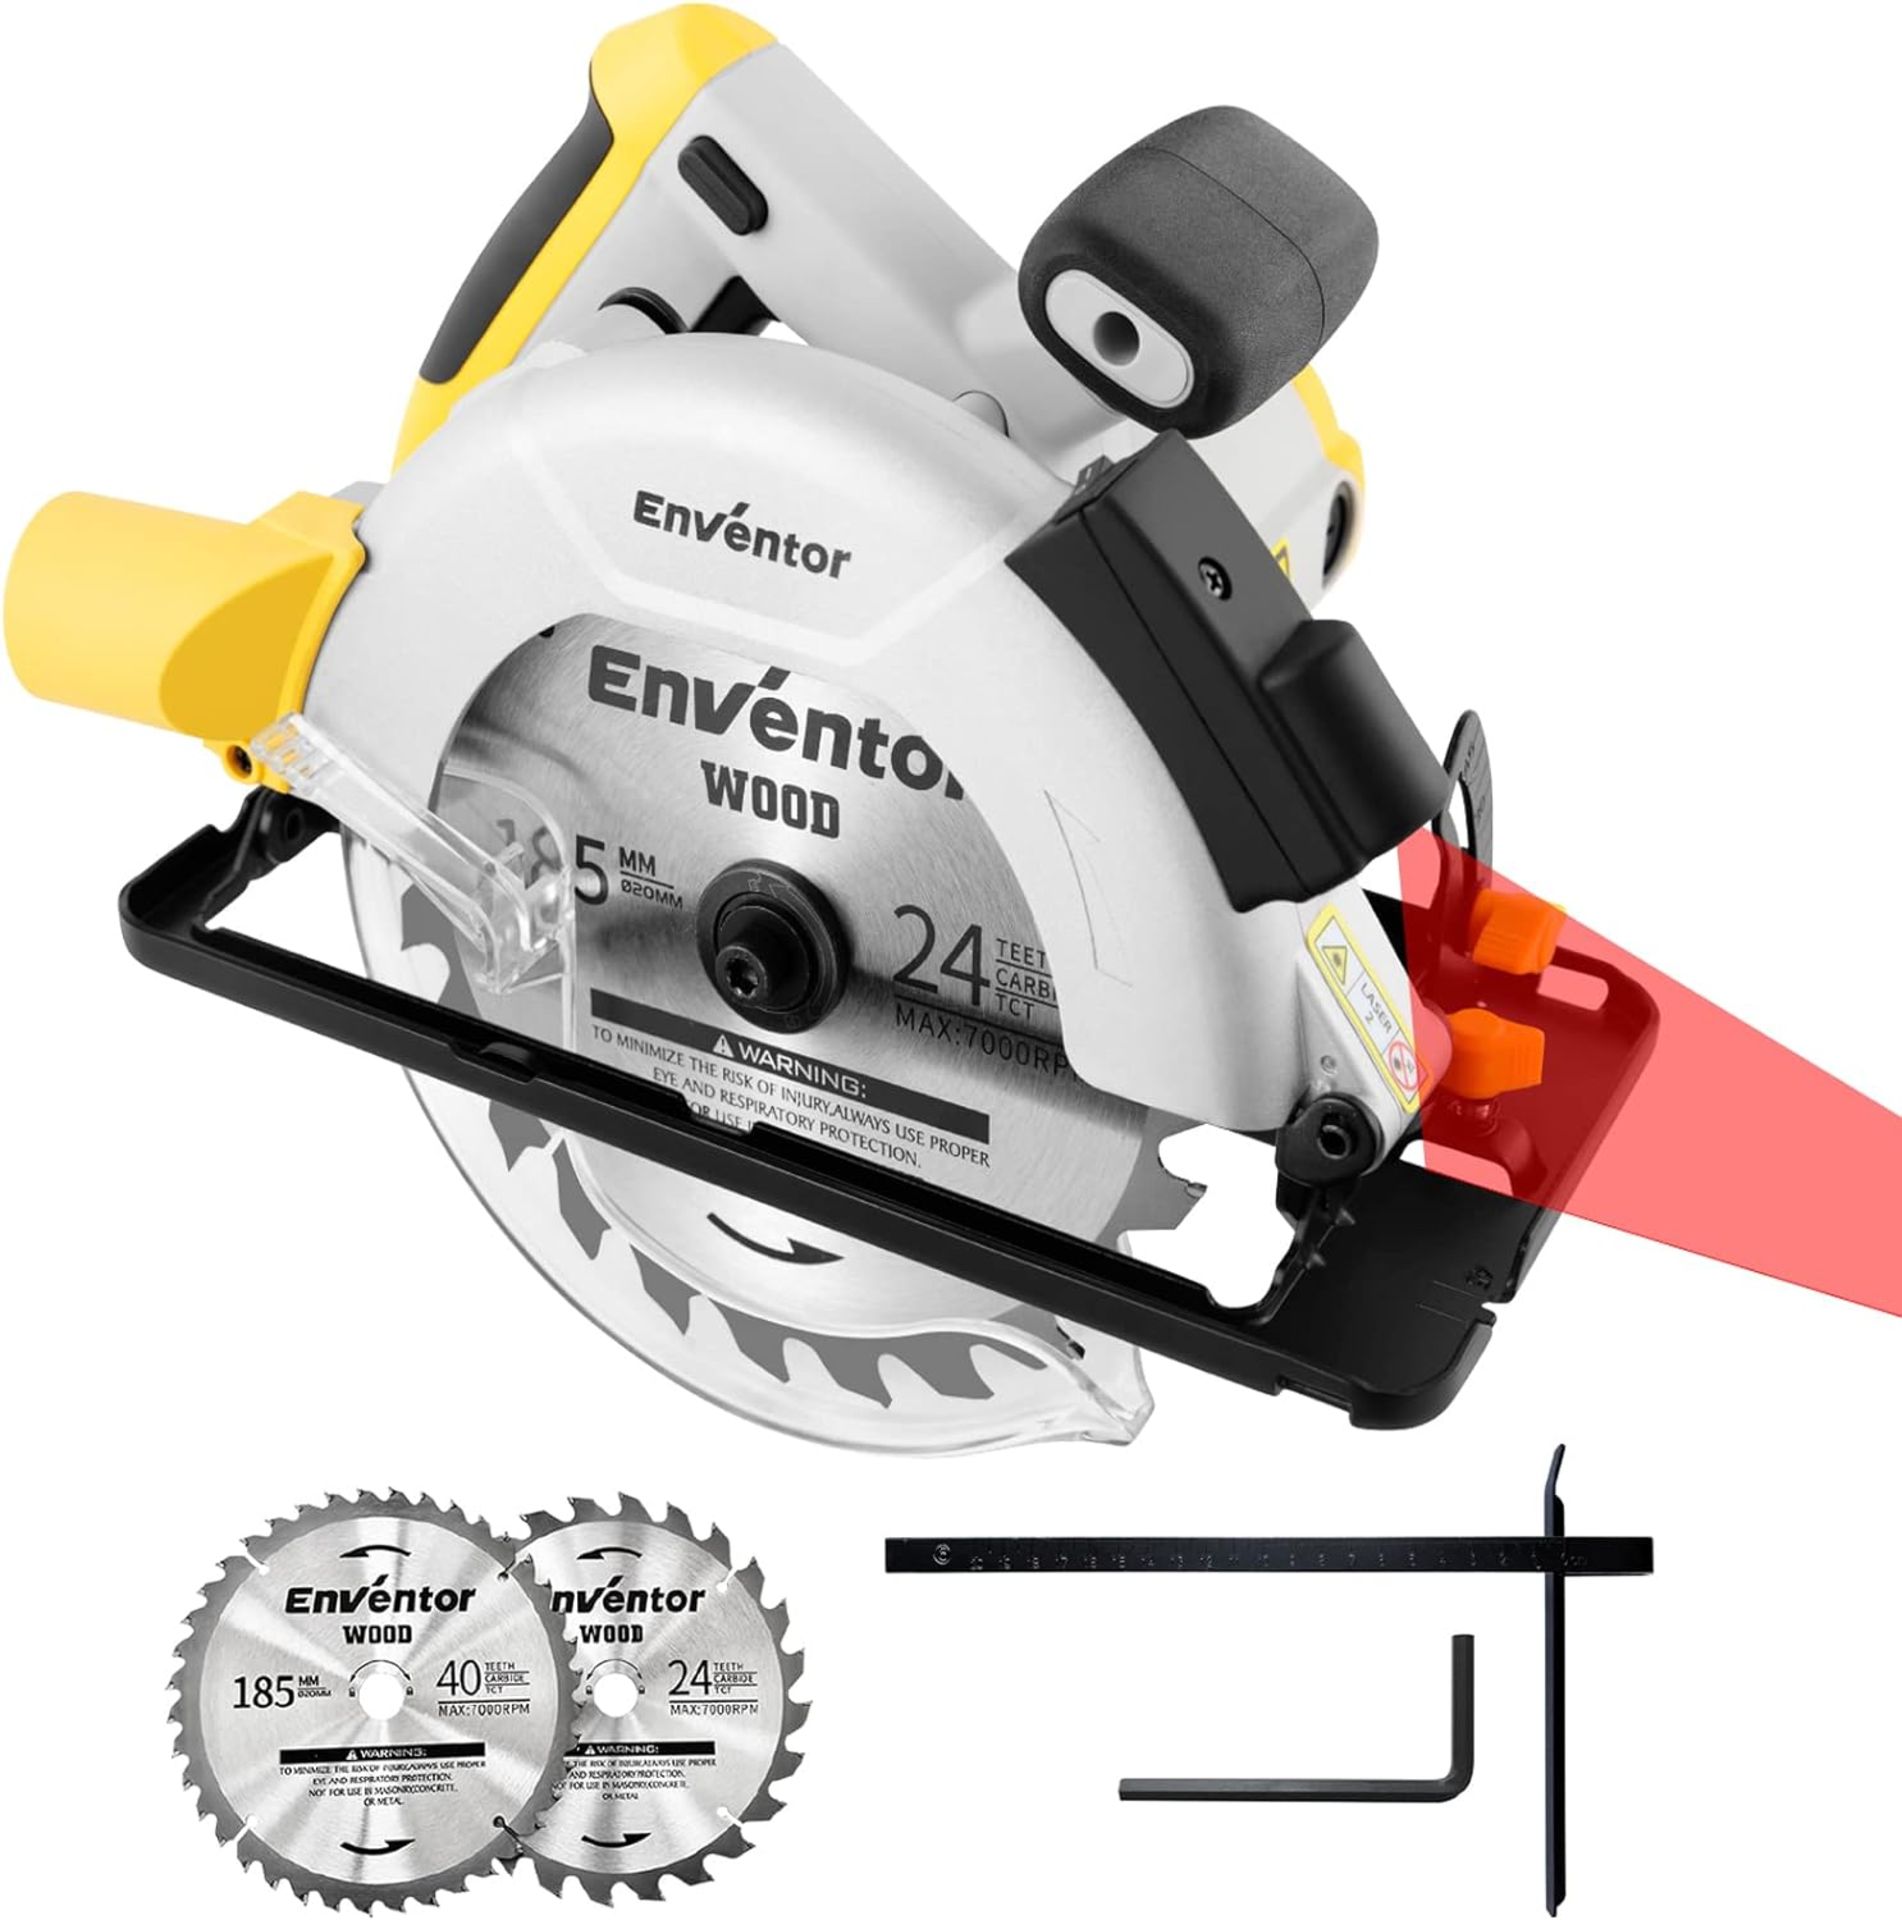 RRP £54.99 Enventor Circular Saw, 1200W 5800RPM Pure Copper Motor Electric Circular Saws with